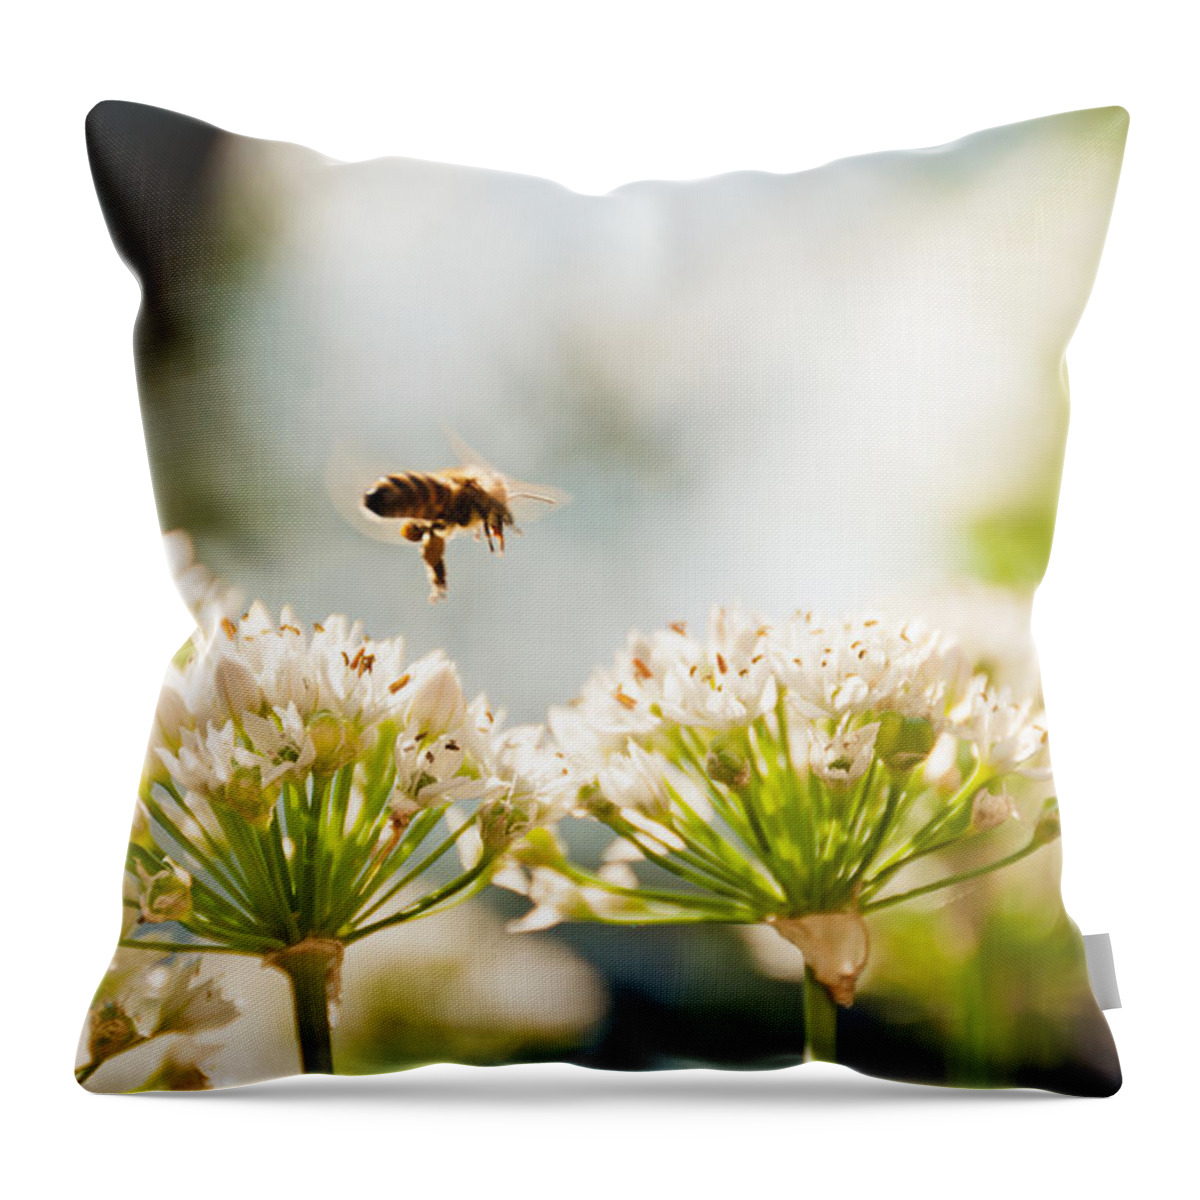 Bee Throw Pillow featuring the photograph Mid-Pollenation by Cheryl Baxter